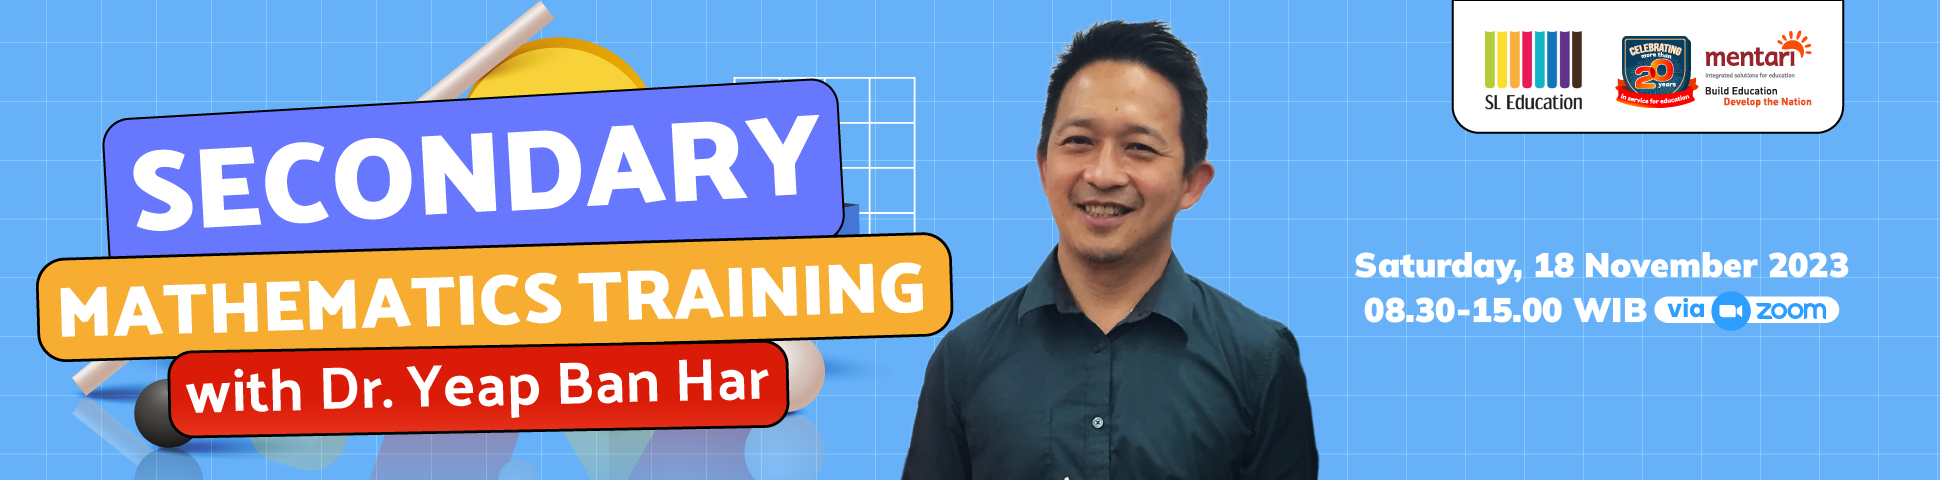 Secondary Mathematics Training with Dr. Yeap Ban Har - Online